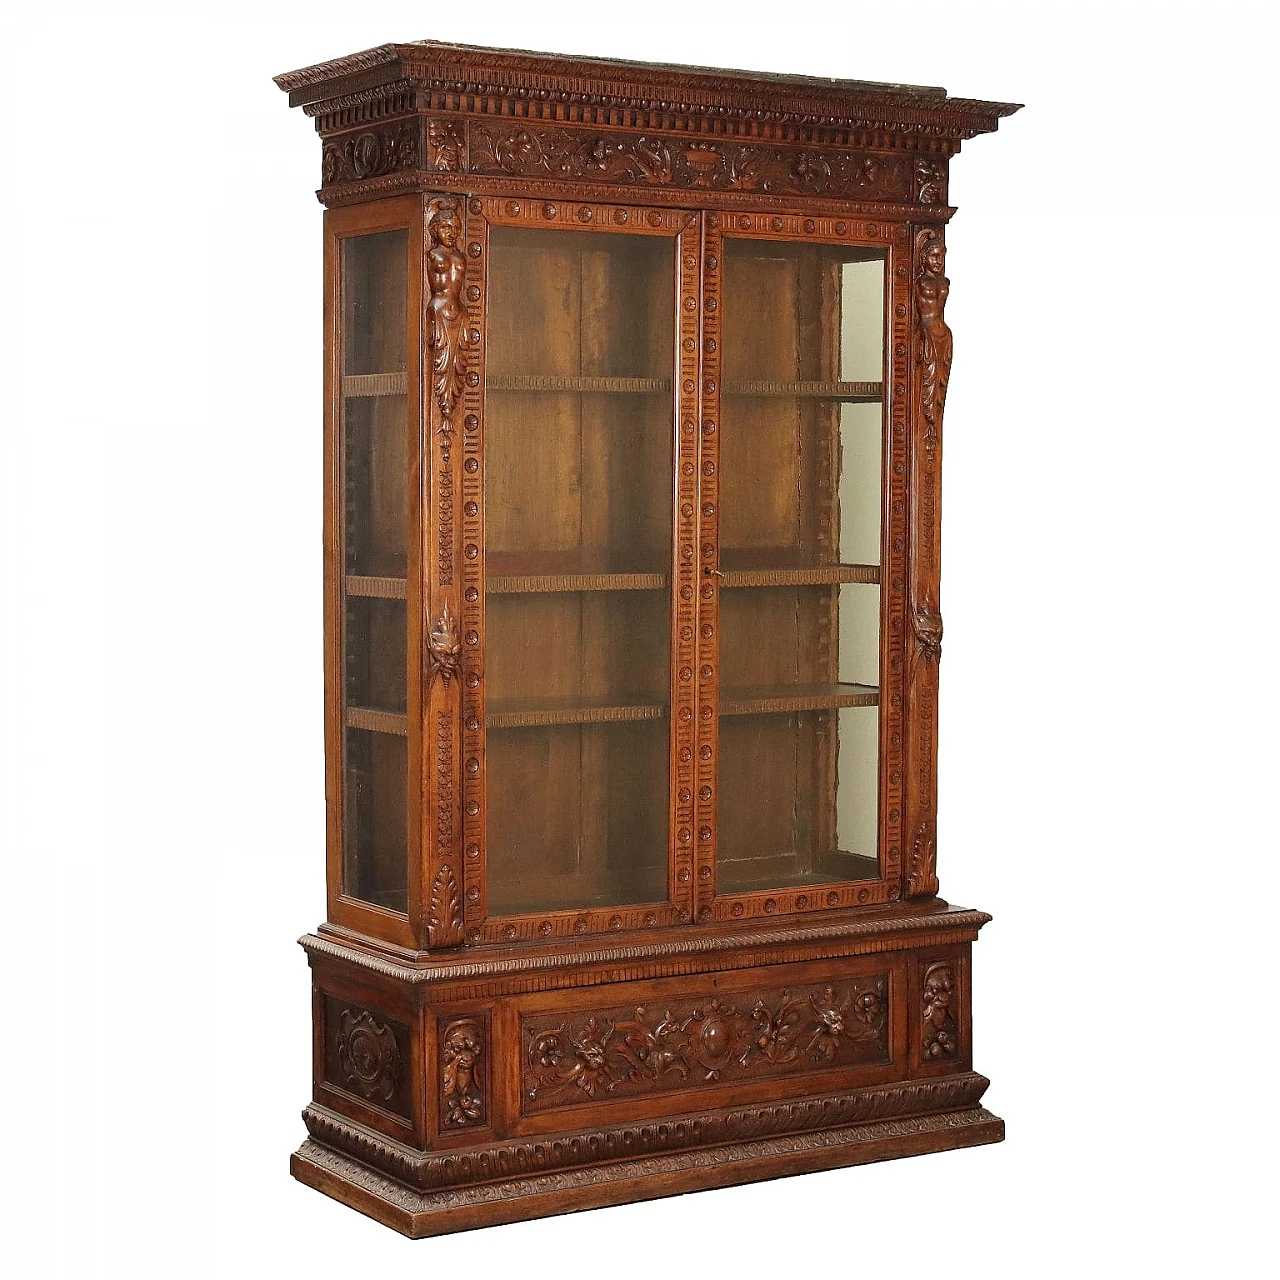 Inlaid walnut showcase with glass doors and drawer, 19th century 1